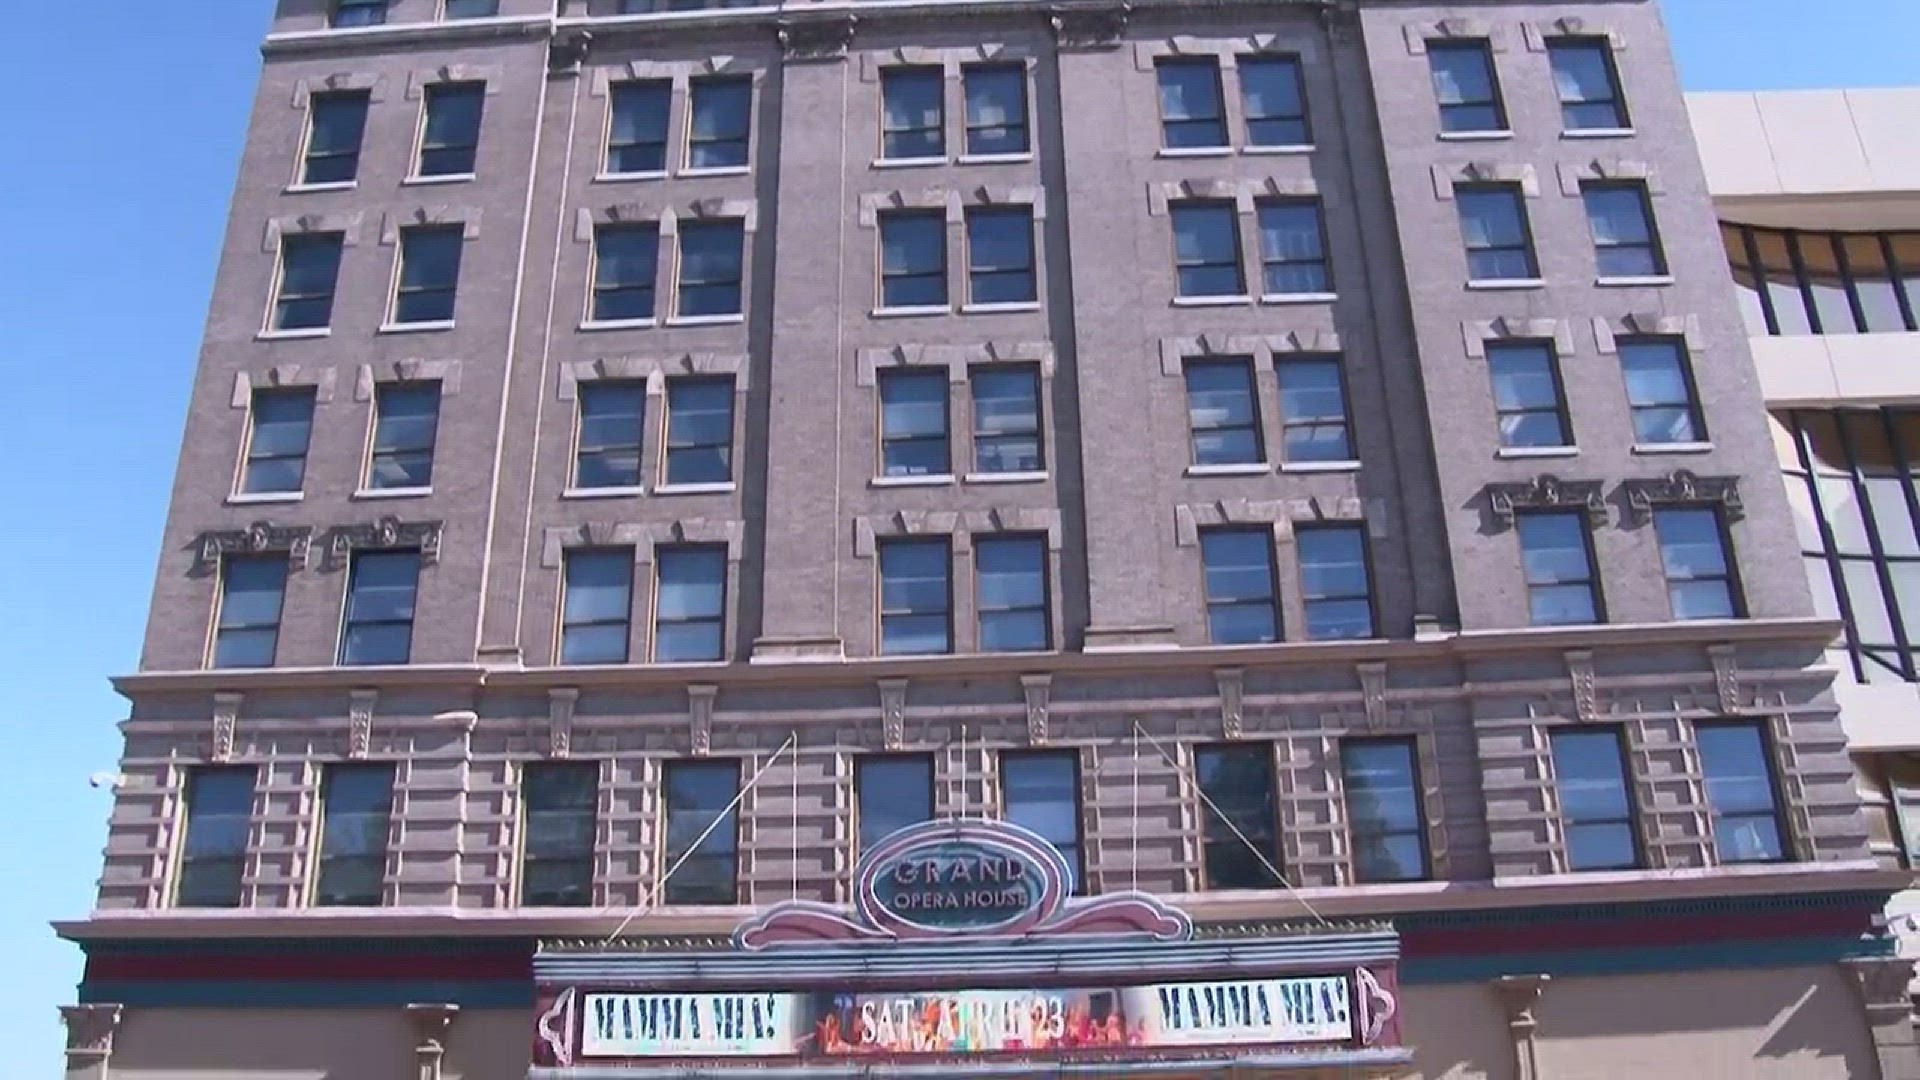 Macon's Grand Opera House has provided entertainment for many for well over a century. It has also frightened some who believe the theater is haunted.